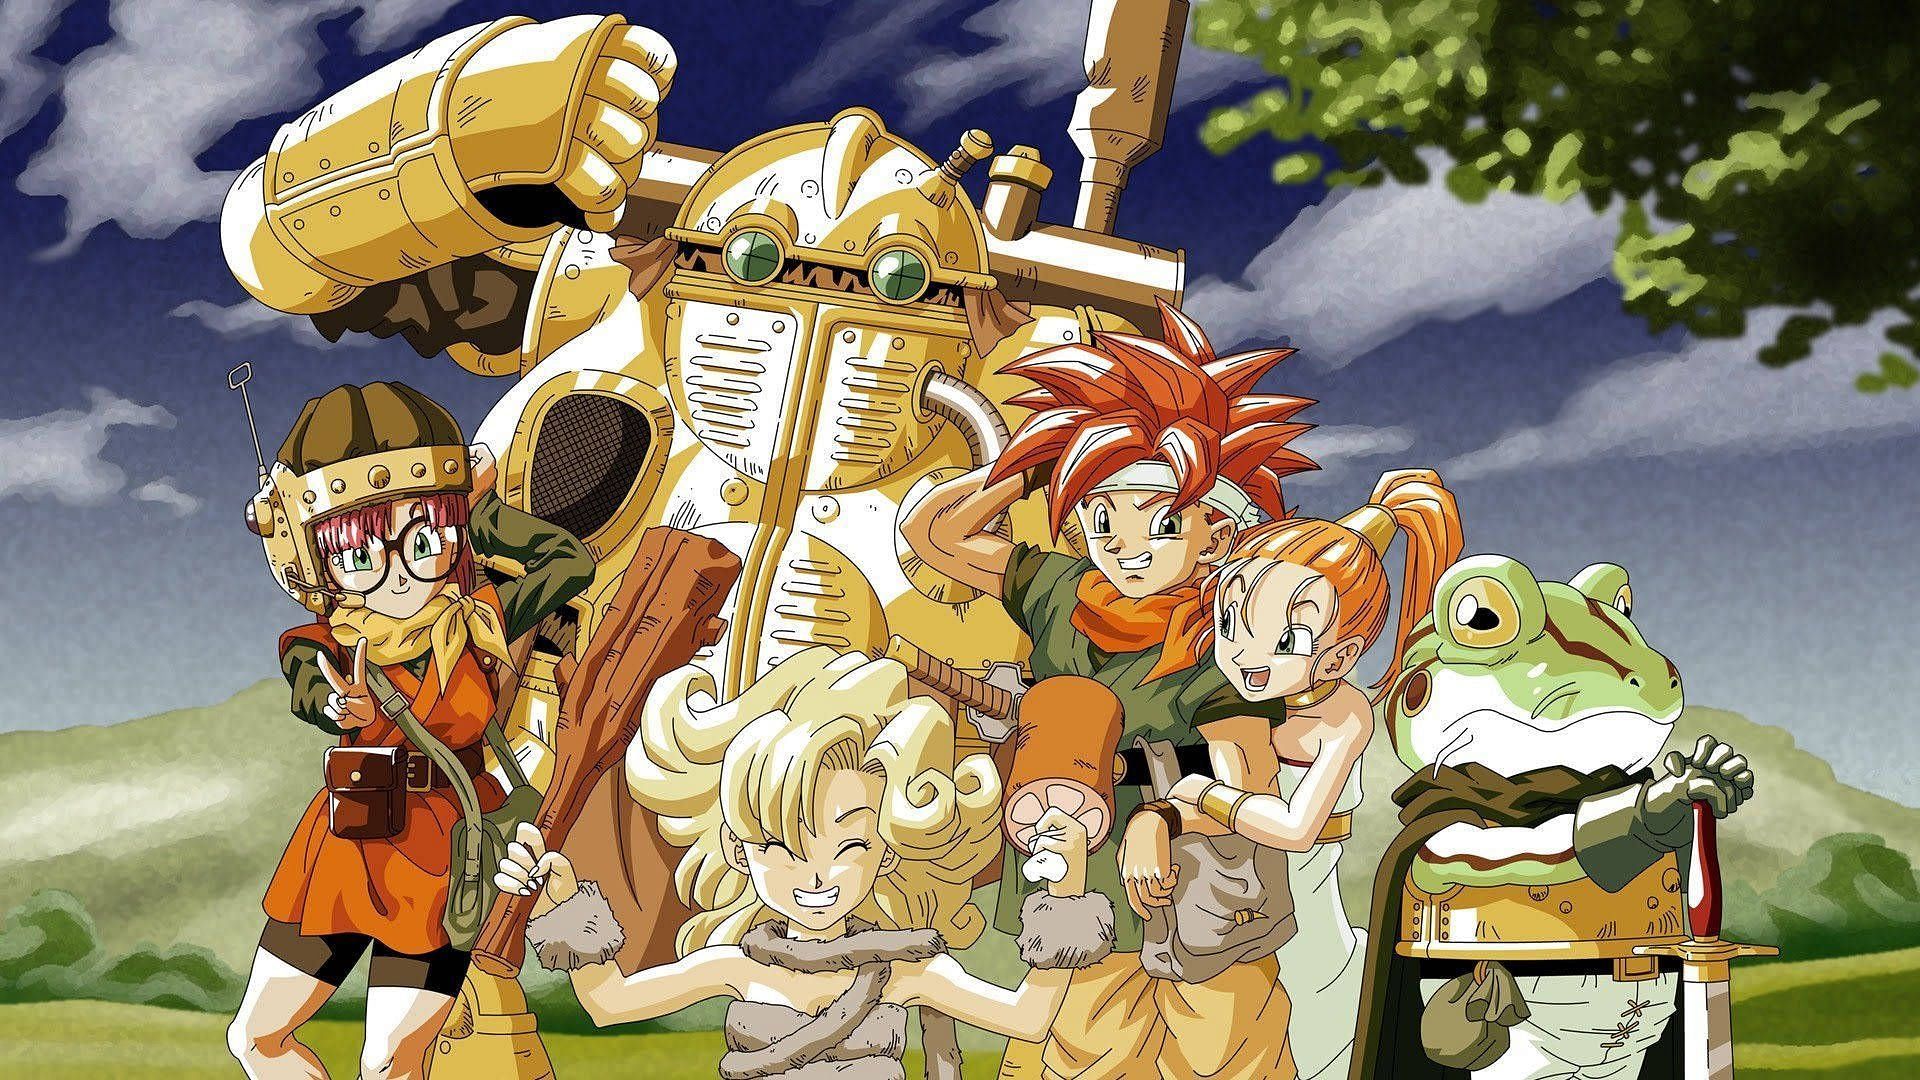 If Dragon Ball, Final Fantasy, and Dragon Quest had a baby, it would look something like this (Image via Square Enix)